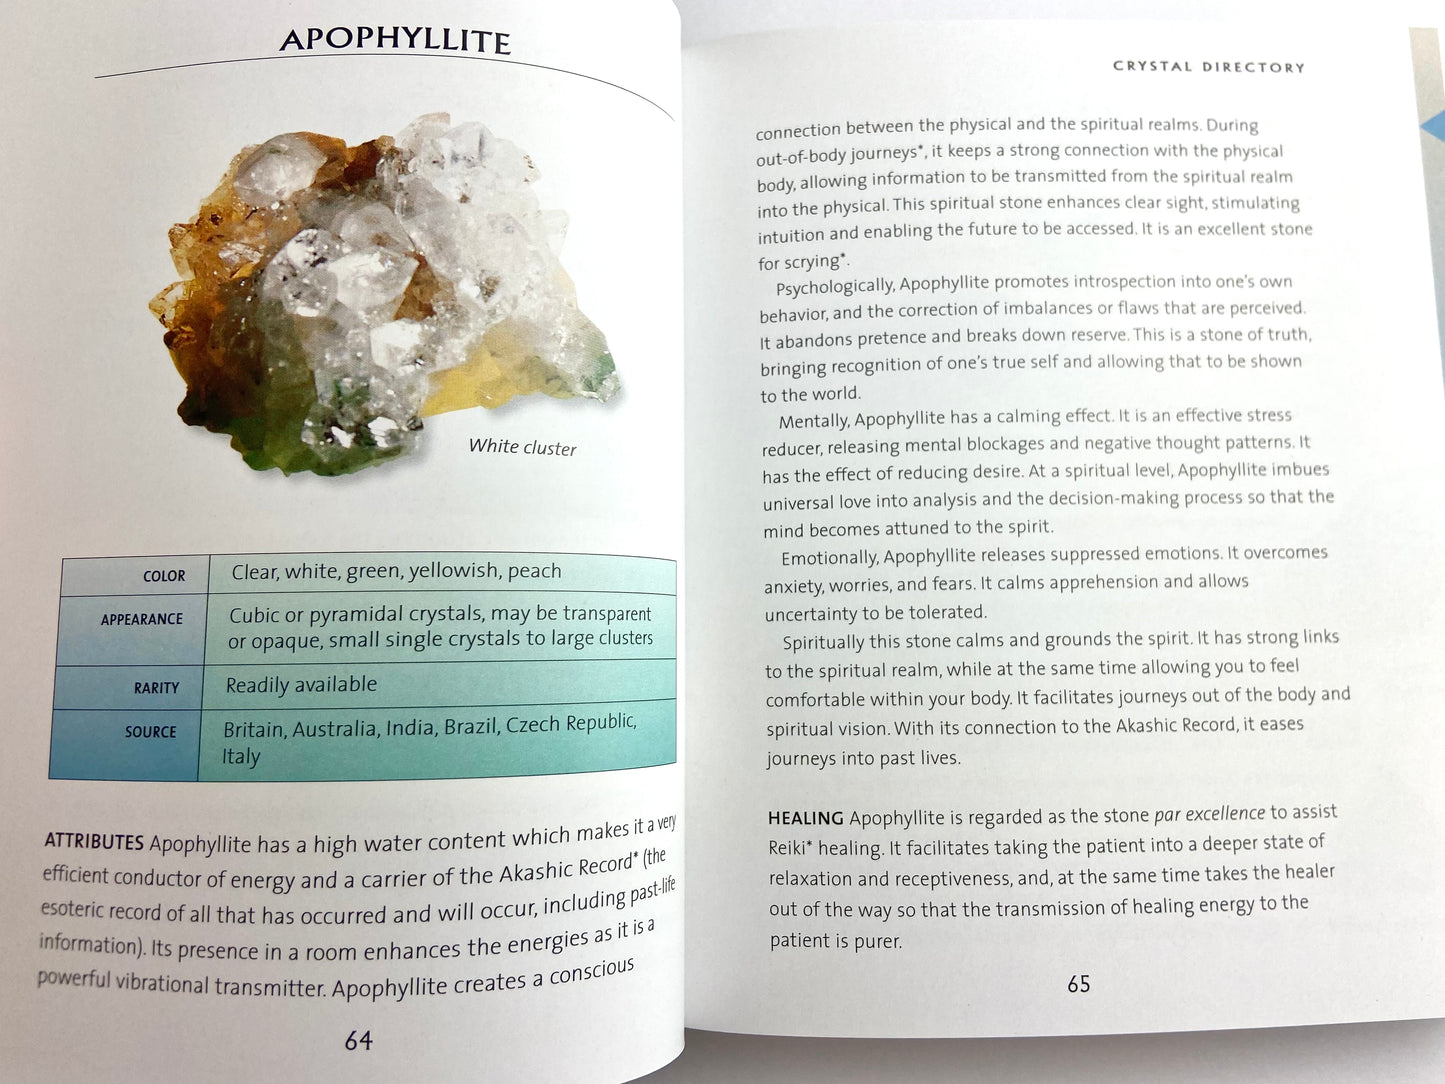 The Crystal Bible Vol 1 Book